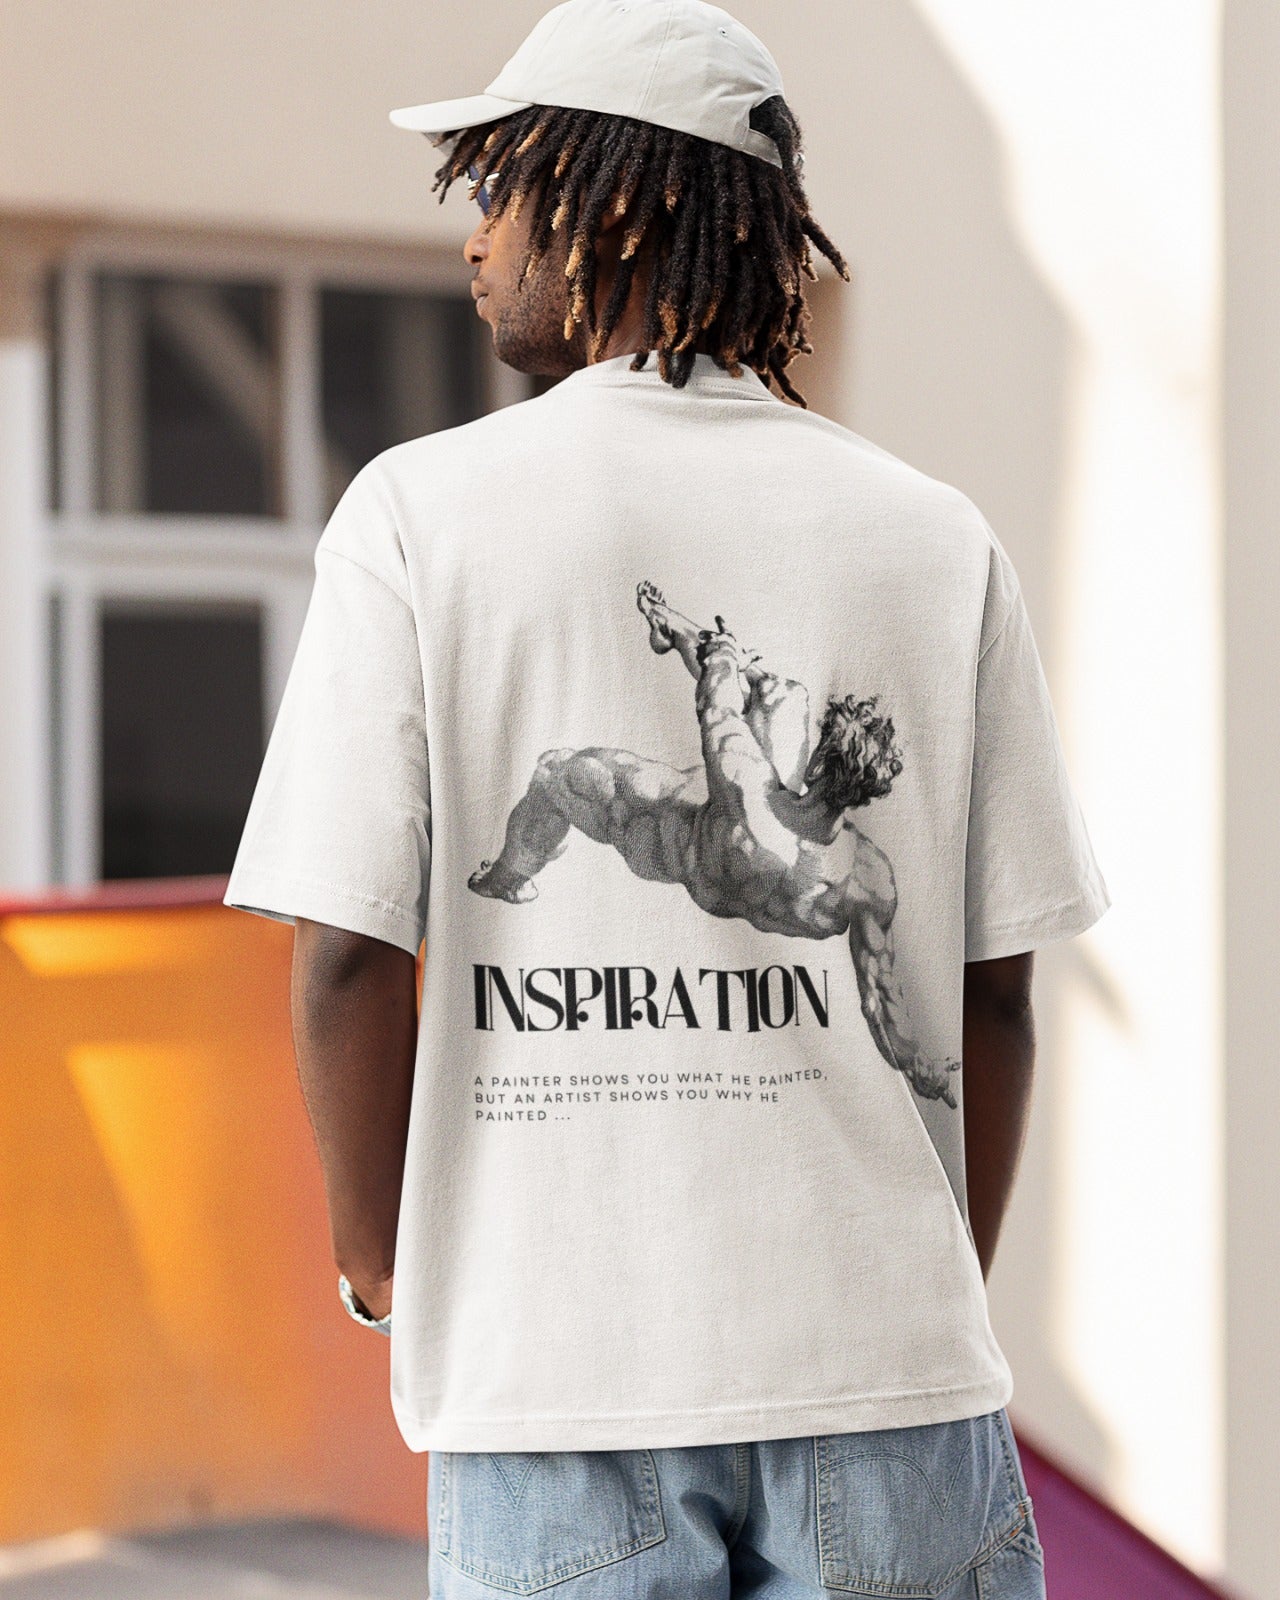 Elevate your style with our Premium White Oversized T-Shirt - "INSPIRATION: Artistry Beyond the Canvas!" This tee showcases an artistically painted black and white nude man seemingly in mid-air, titled "INSPIRATION." Below, it bears a profound message: "A painter shows you what he painted, But an artist shows you why he painted..." This shirt is a canvas of expression, inviting you to explore deeper artistic meaning. Order now and express your inner artist with style.